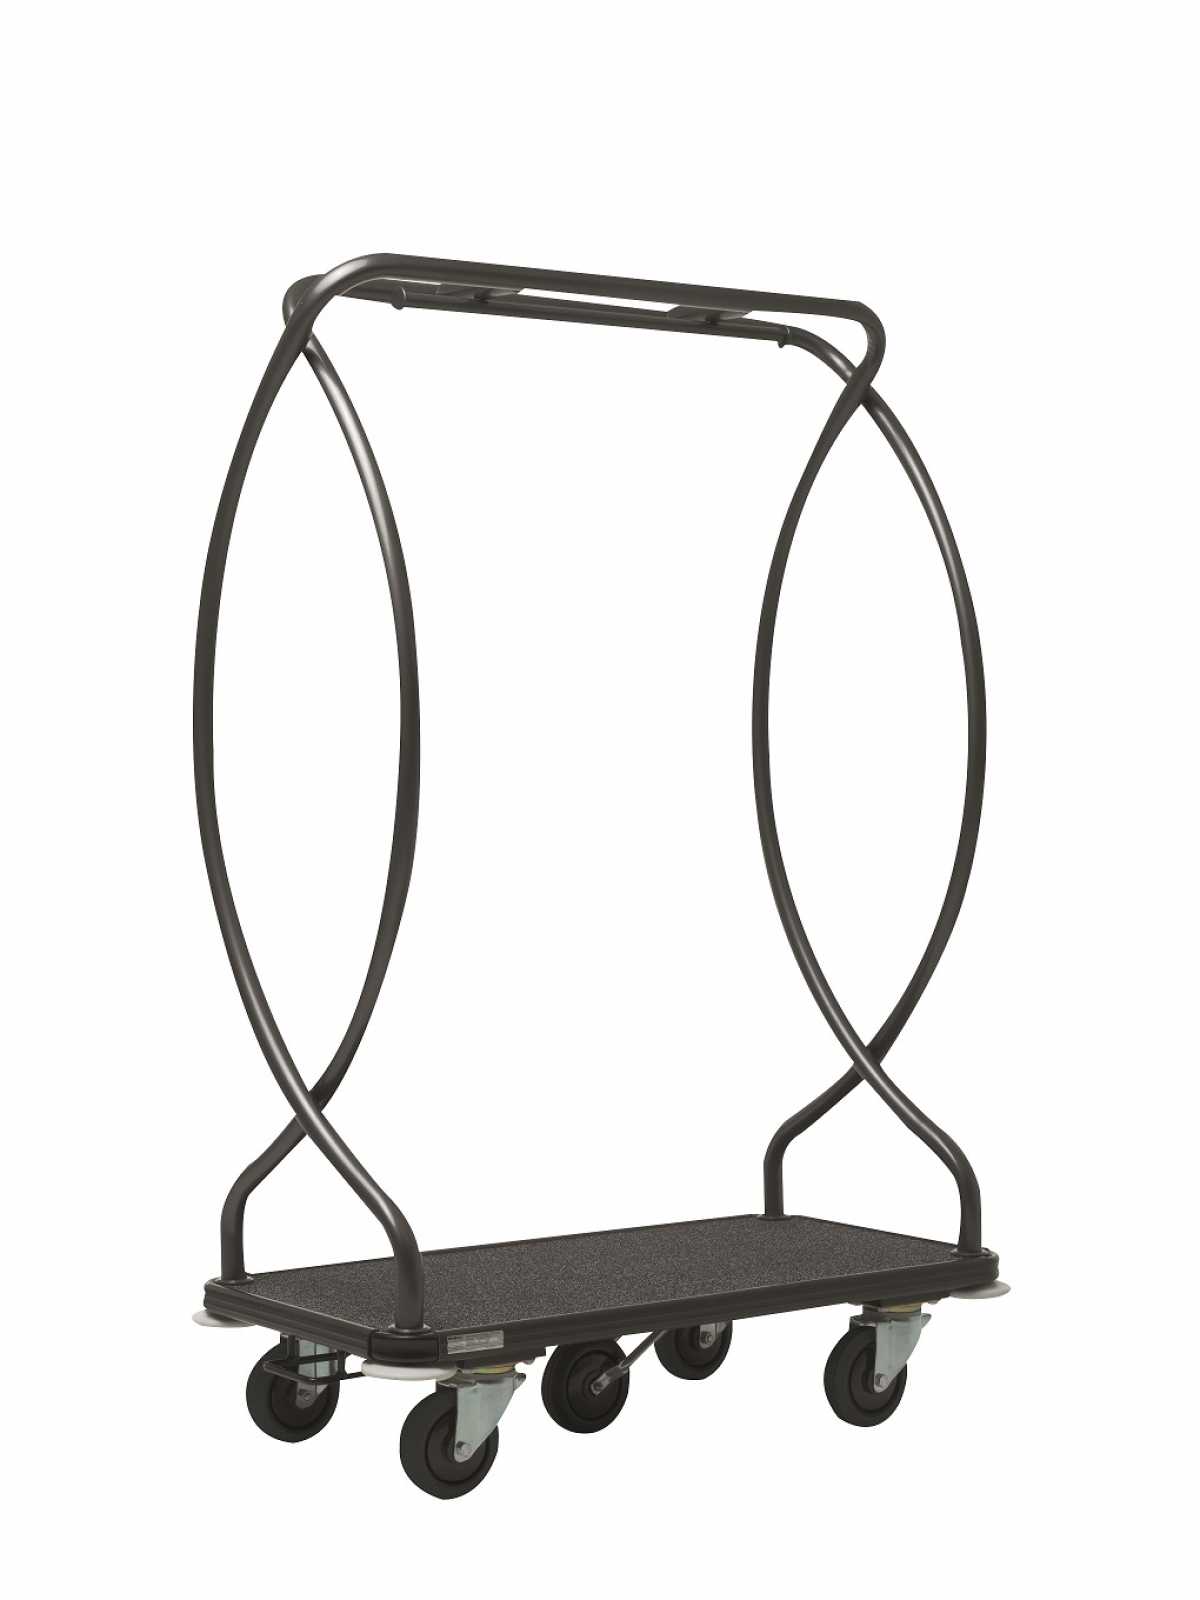 WANZL Luggage Collection Trolley Premium GS-Trend, Black Electro-polished stainless steel